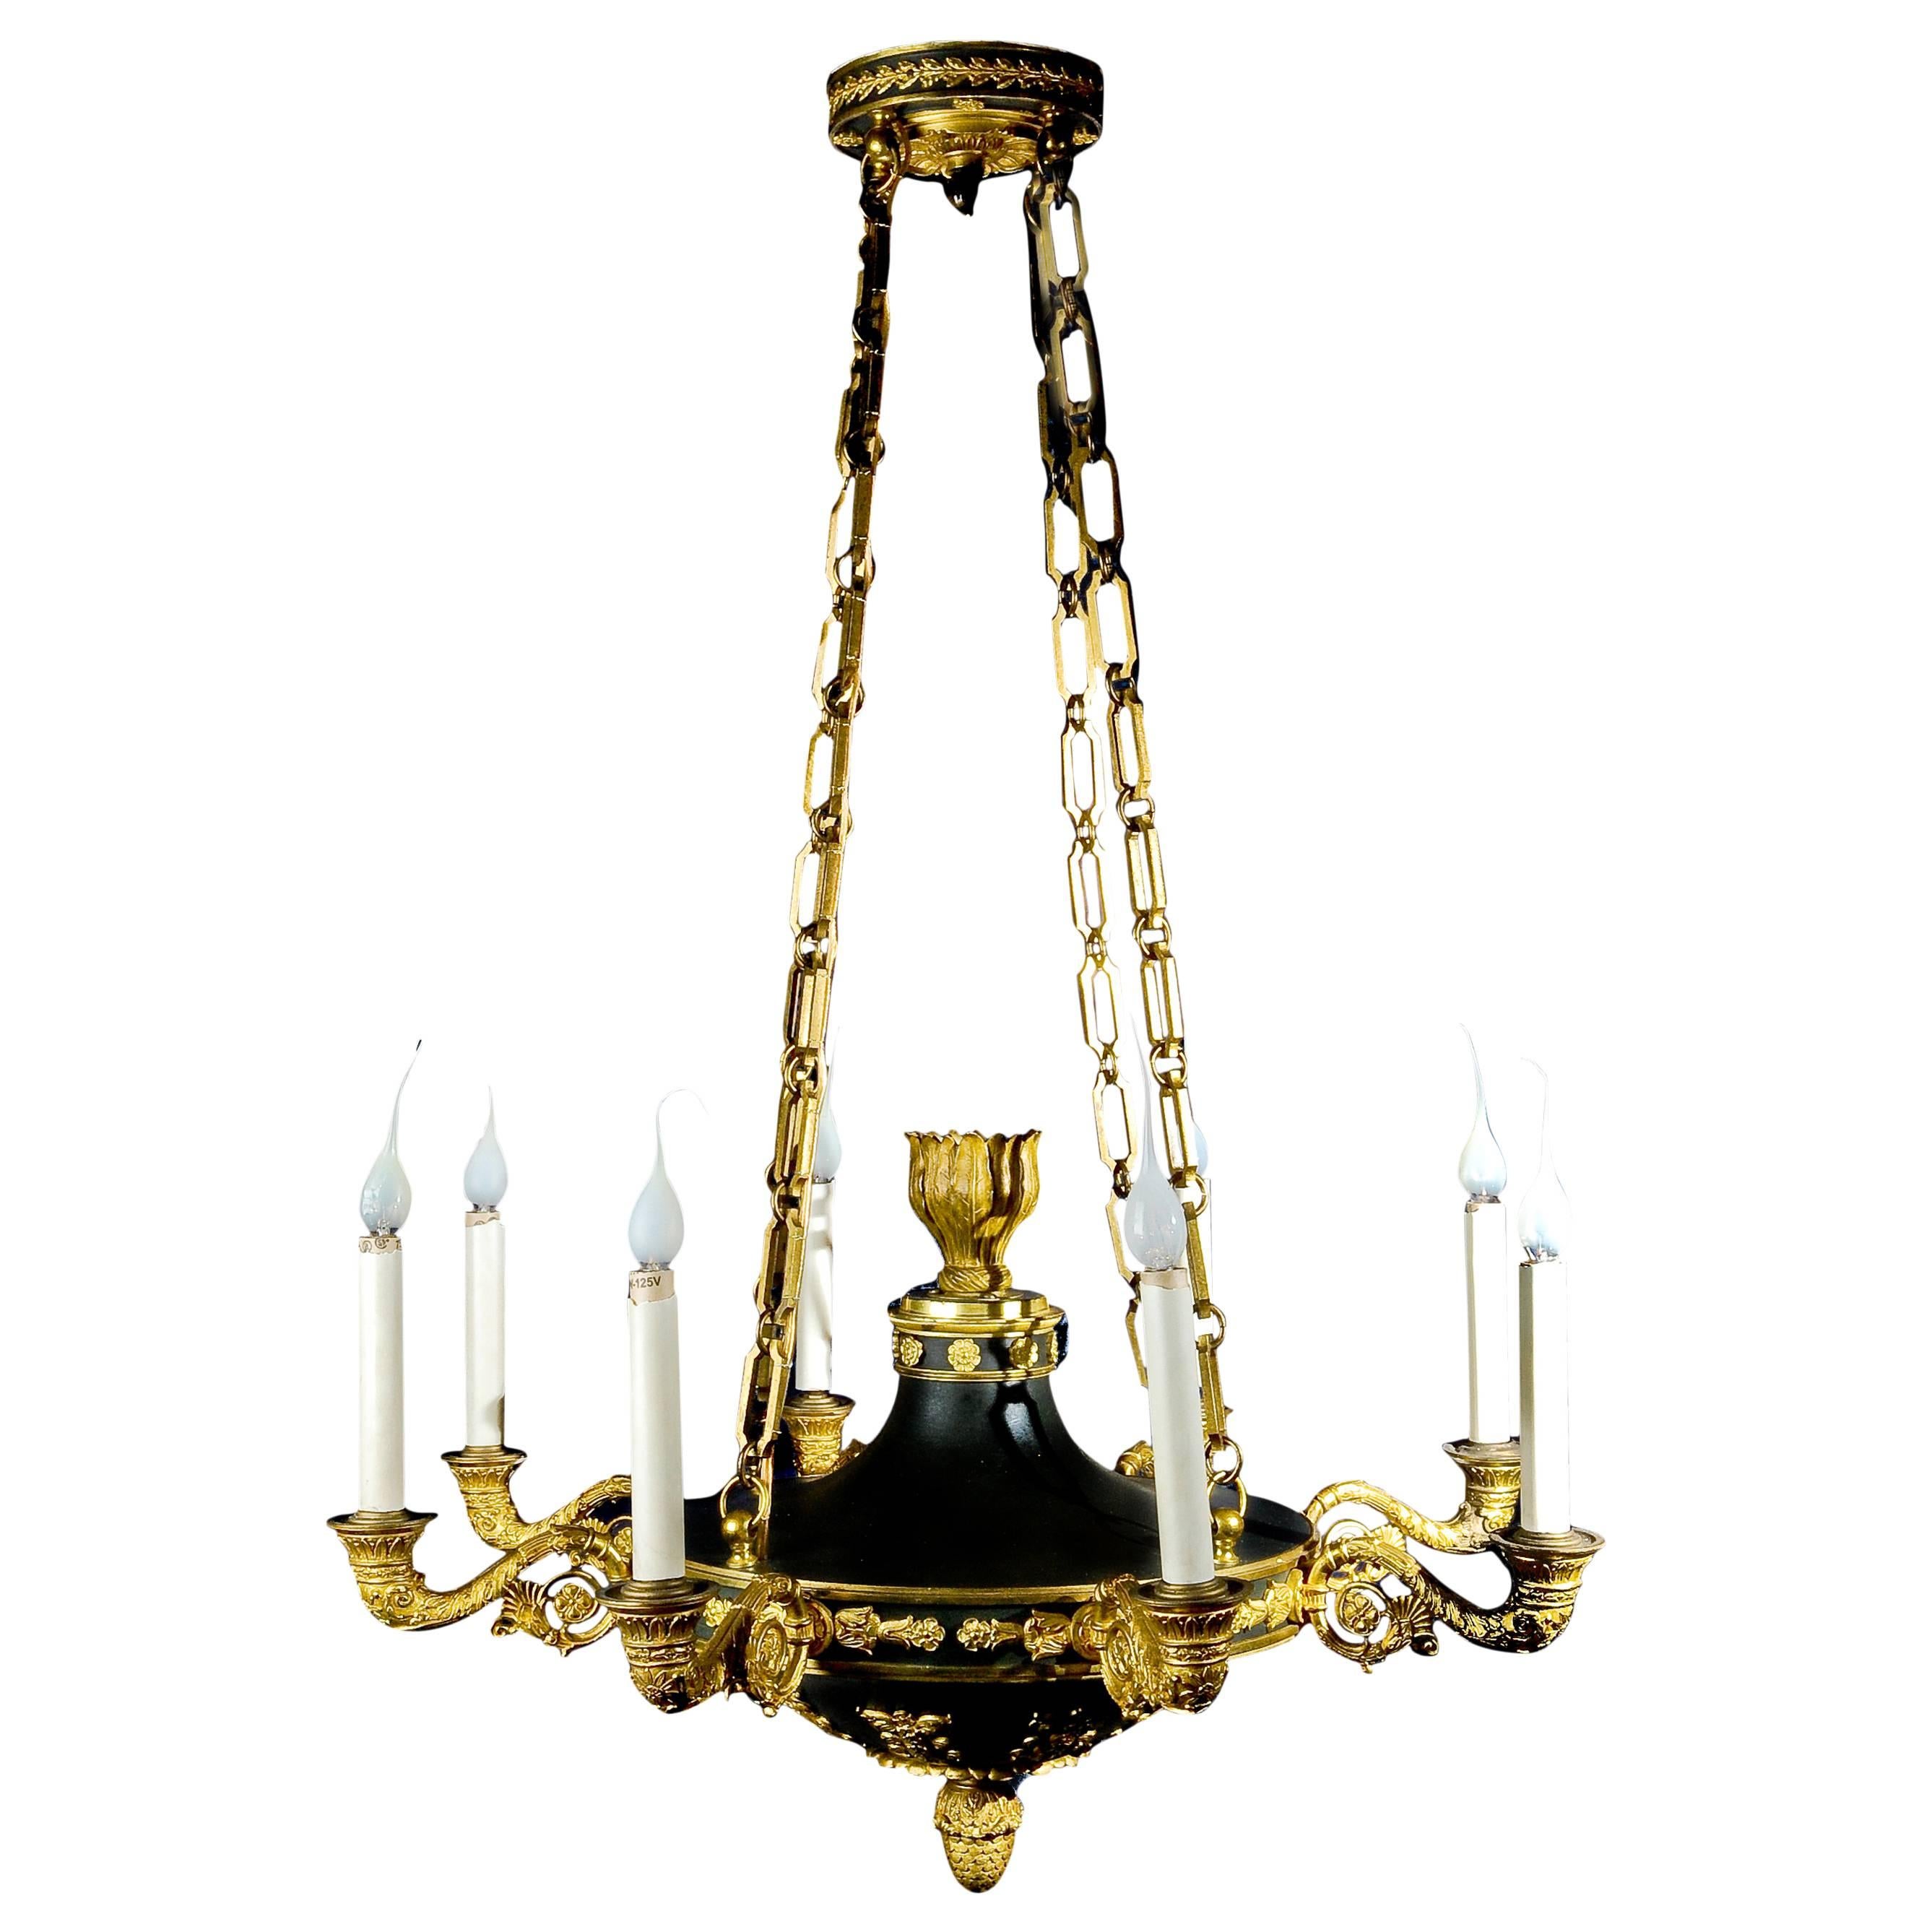 Fine Antique French Empire Neoclassical Gilt and Patina Bronze Chandelier